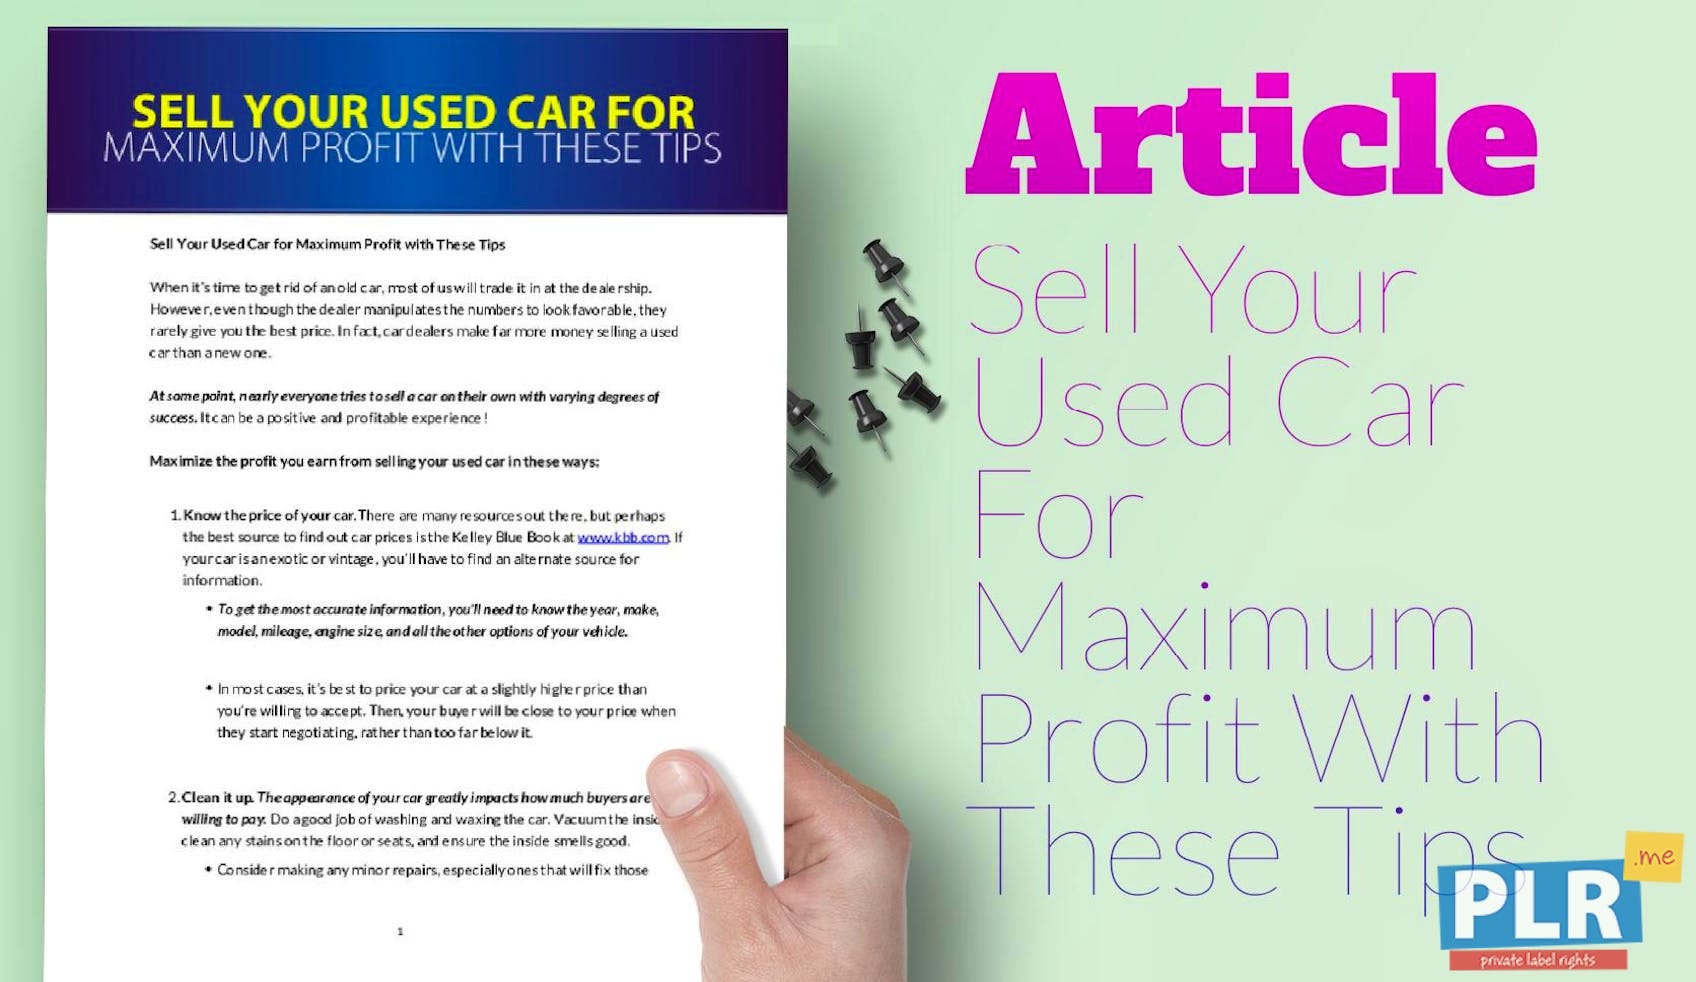 How to Sell a Blog Site for Maximum Profit? Proven Strategies